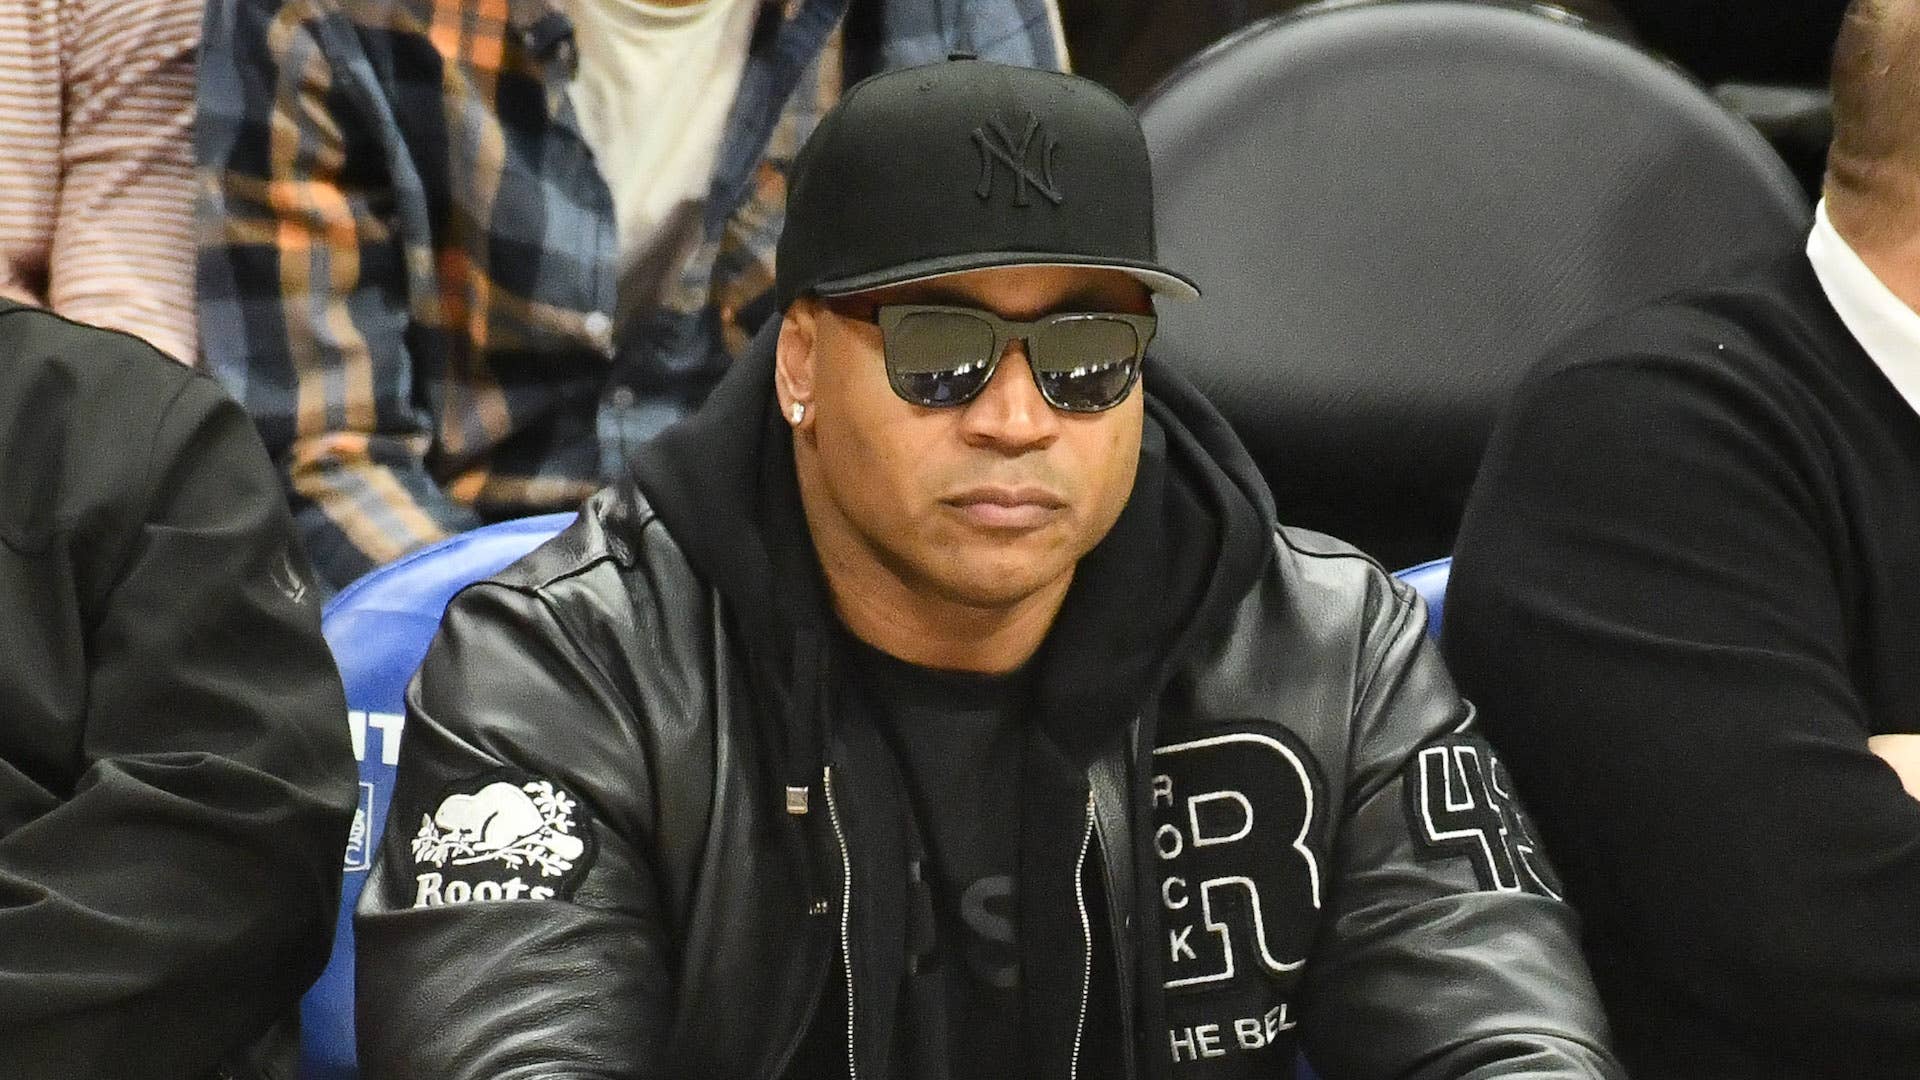 LL Cool J attends a basketball game